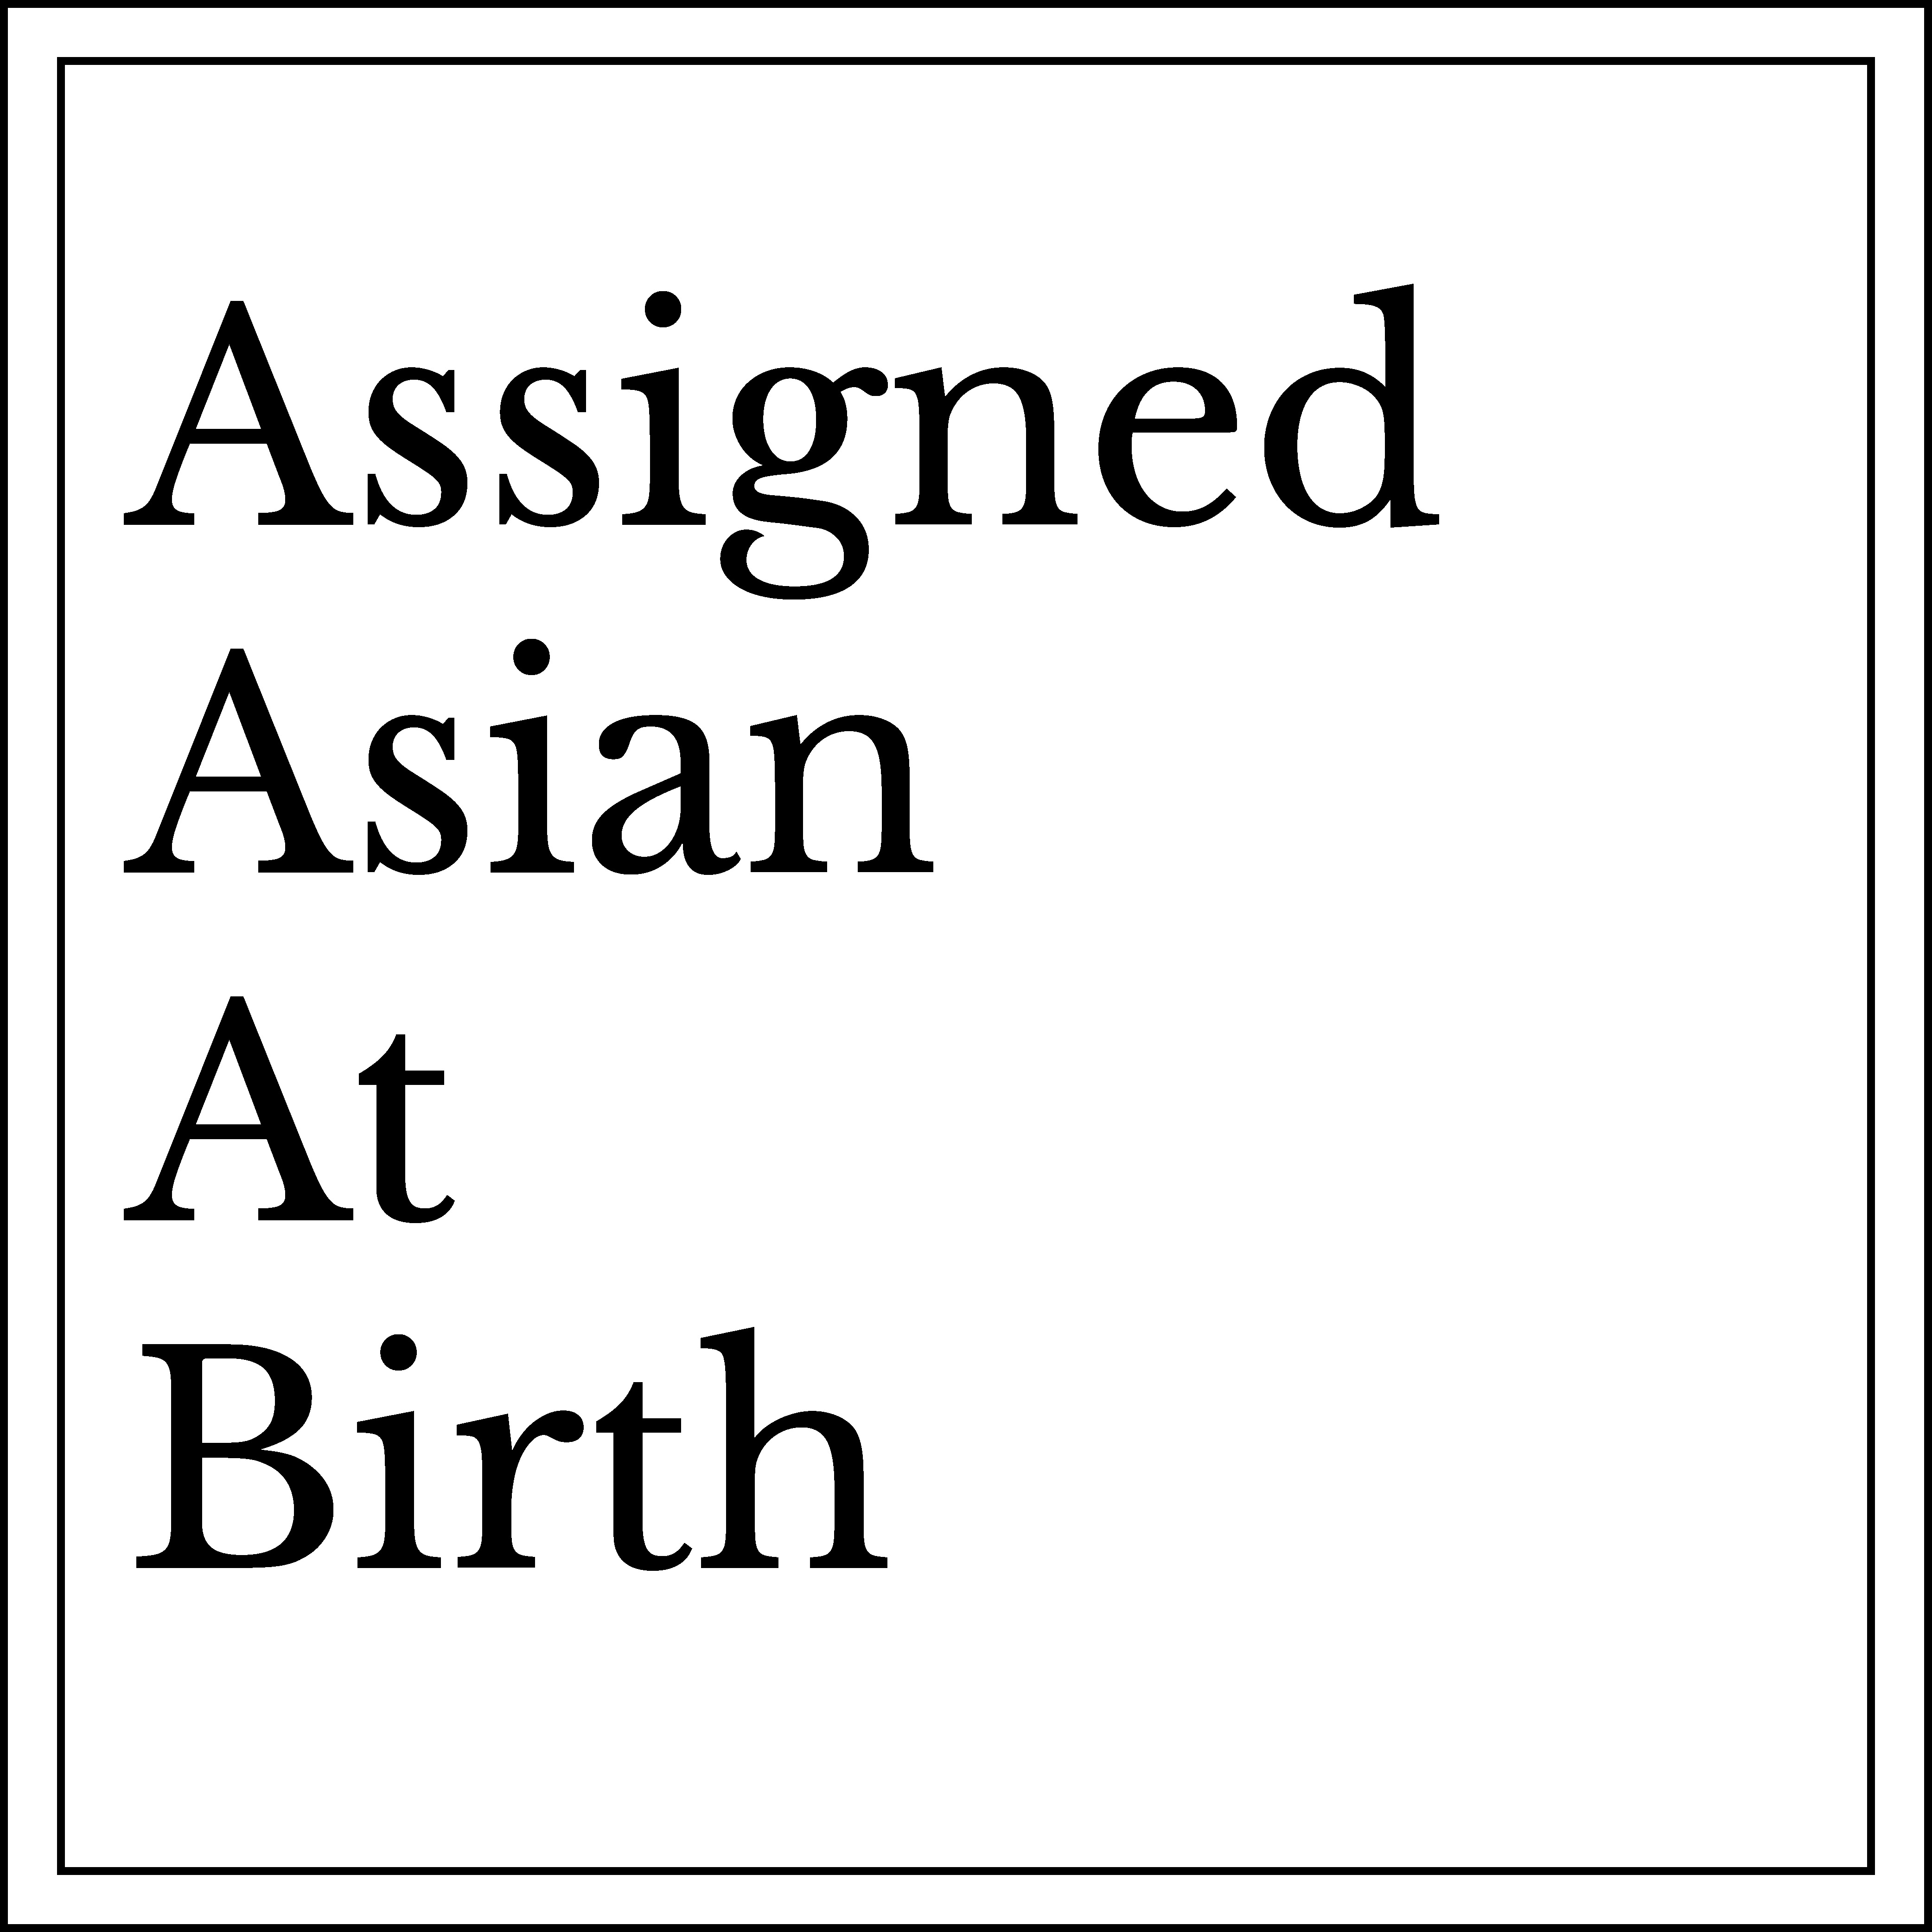 Assigned Asian at Birth